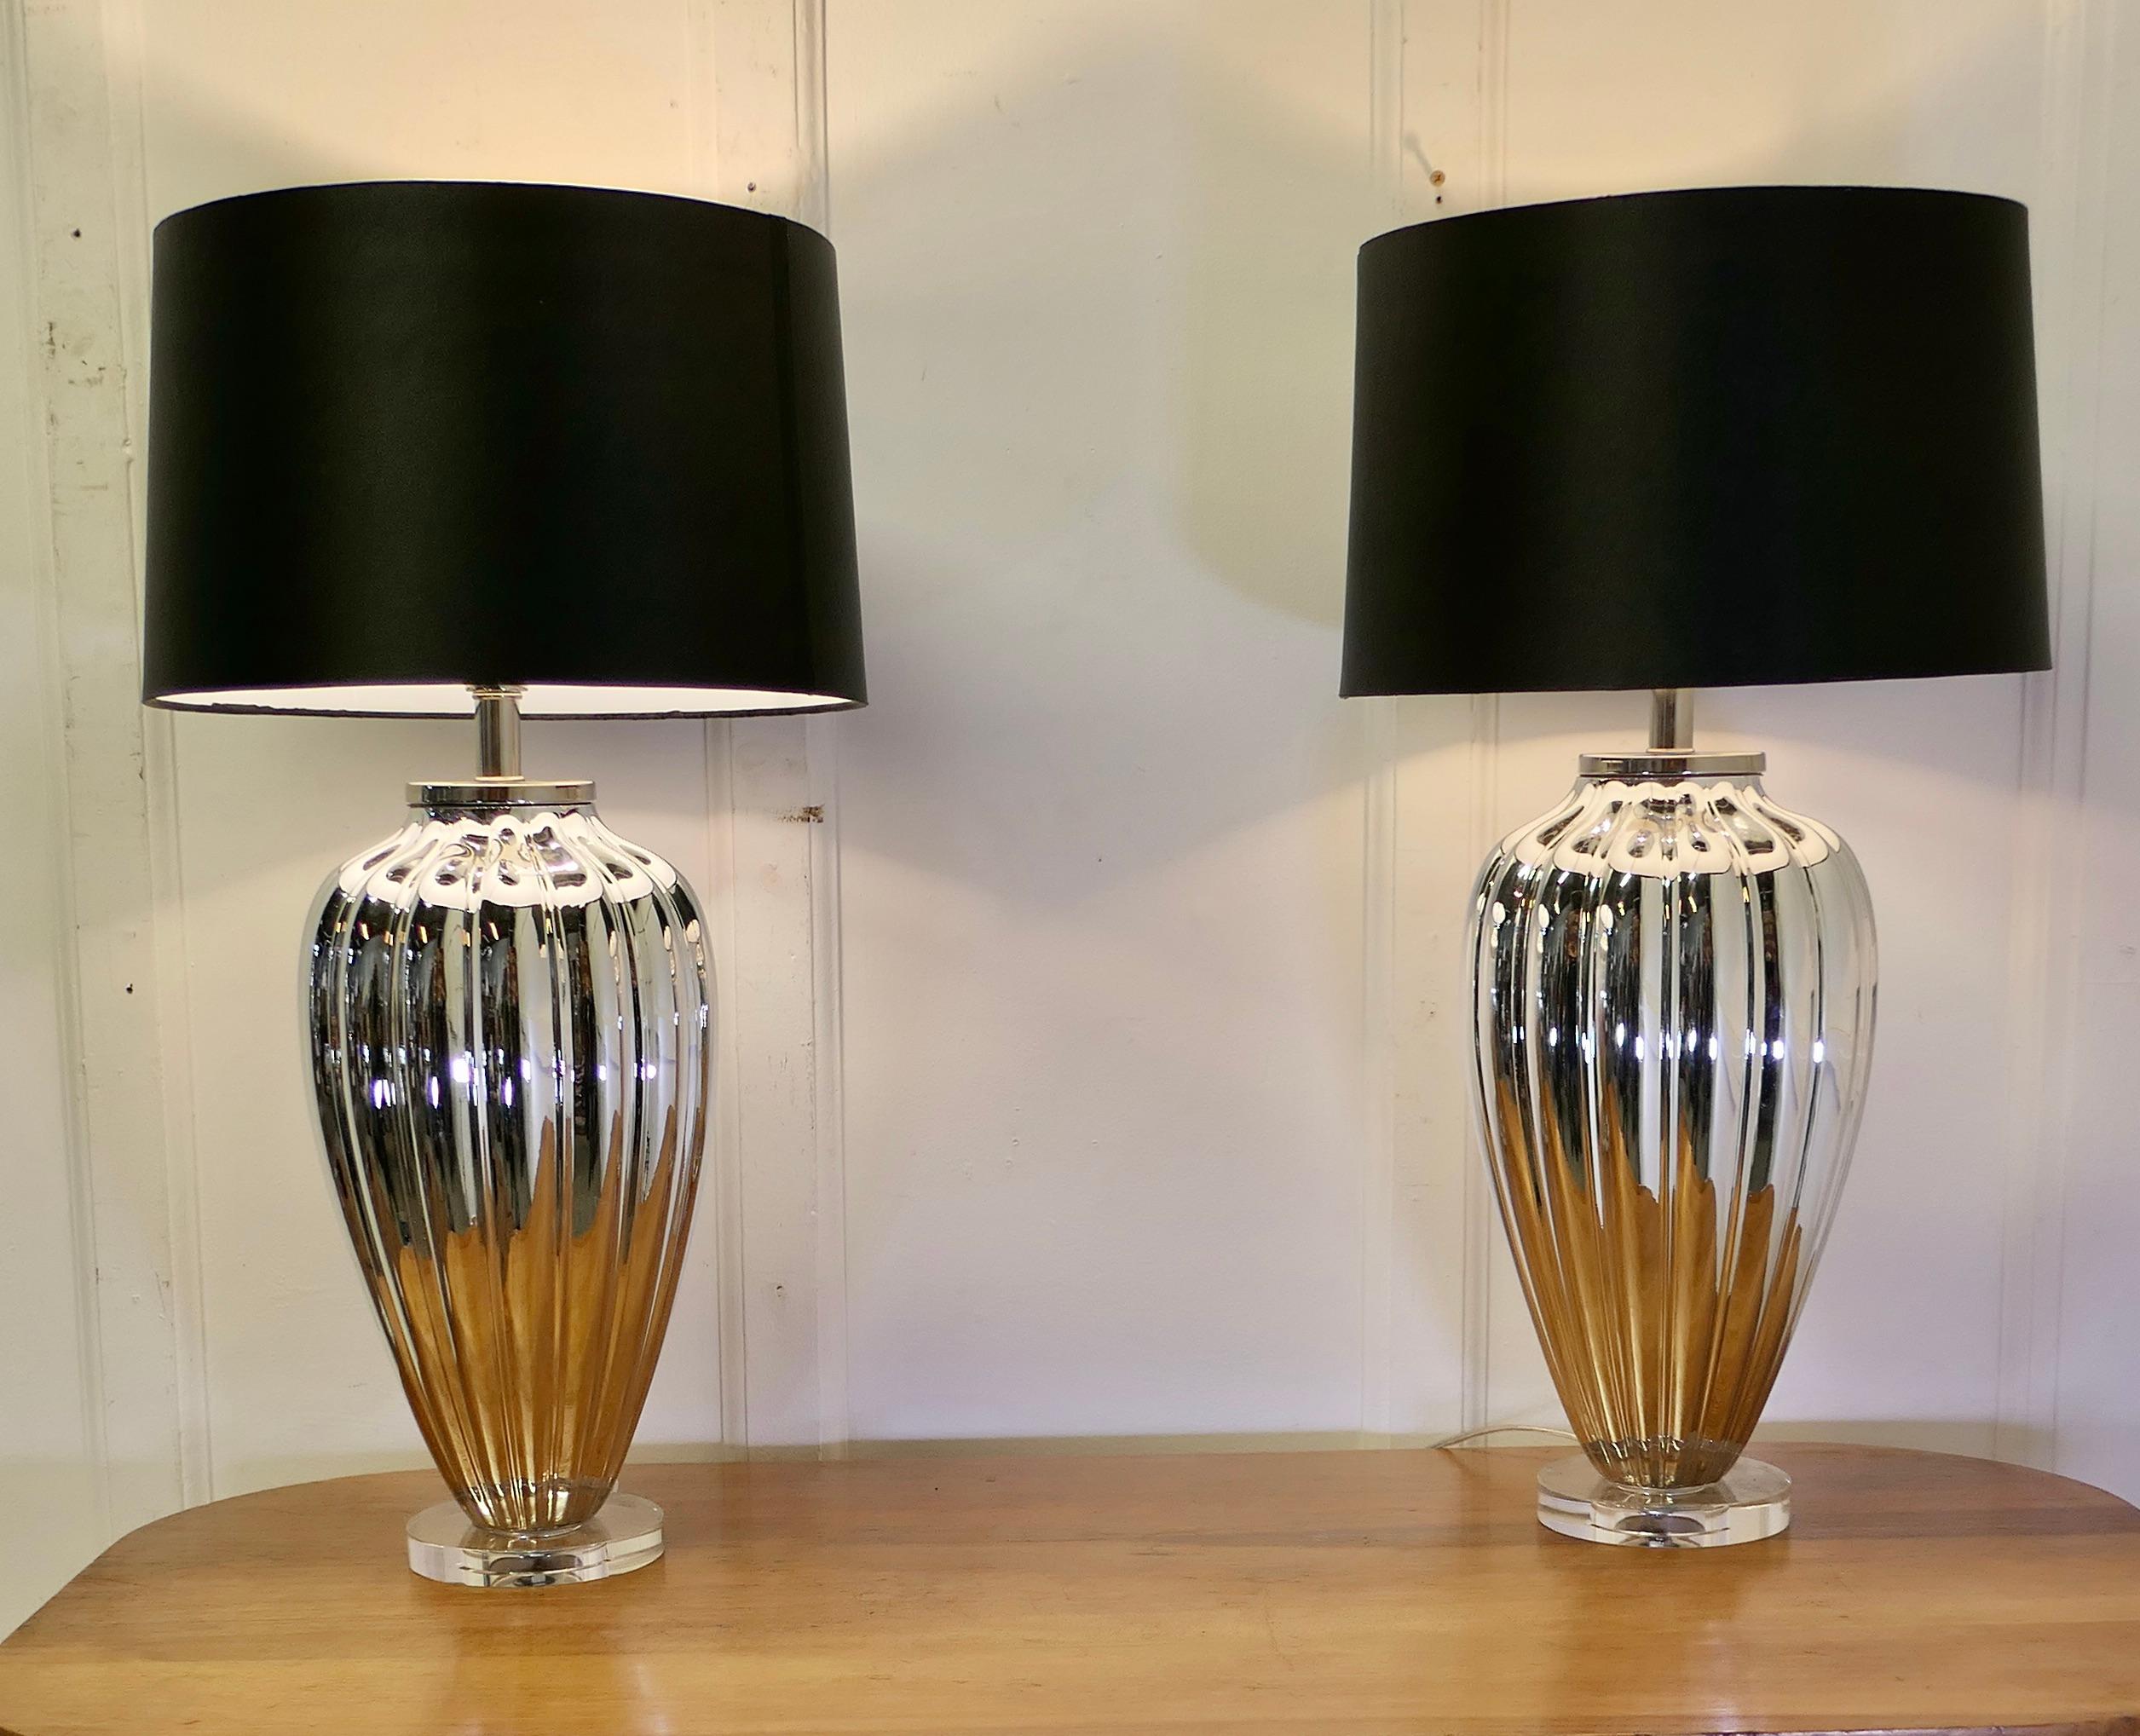 A Pair of Silvered Glass Table Lamps 

The lamps stand on a circular glass foot, they have a large fluted glass baluster which is silvered  

These are a stunning pair lamps and are matched with new black linen shades  
The lamps are in good